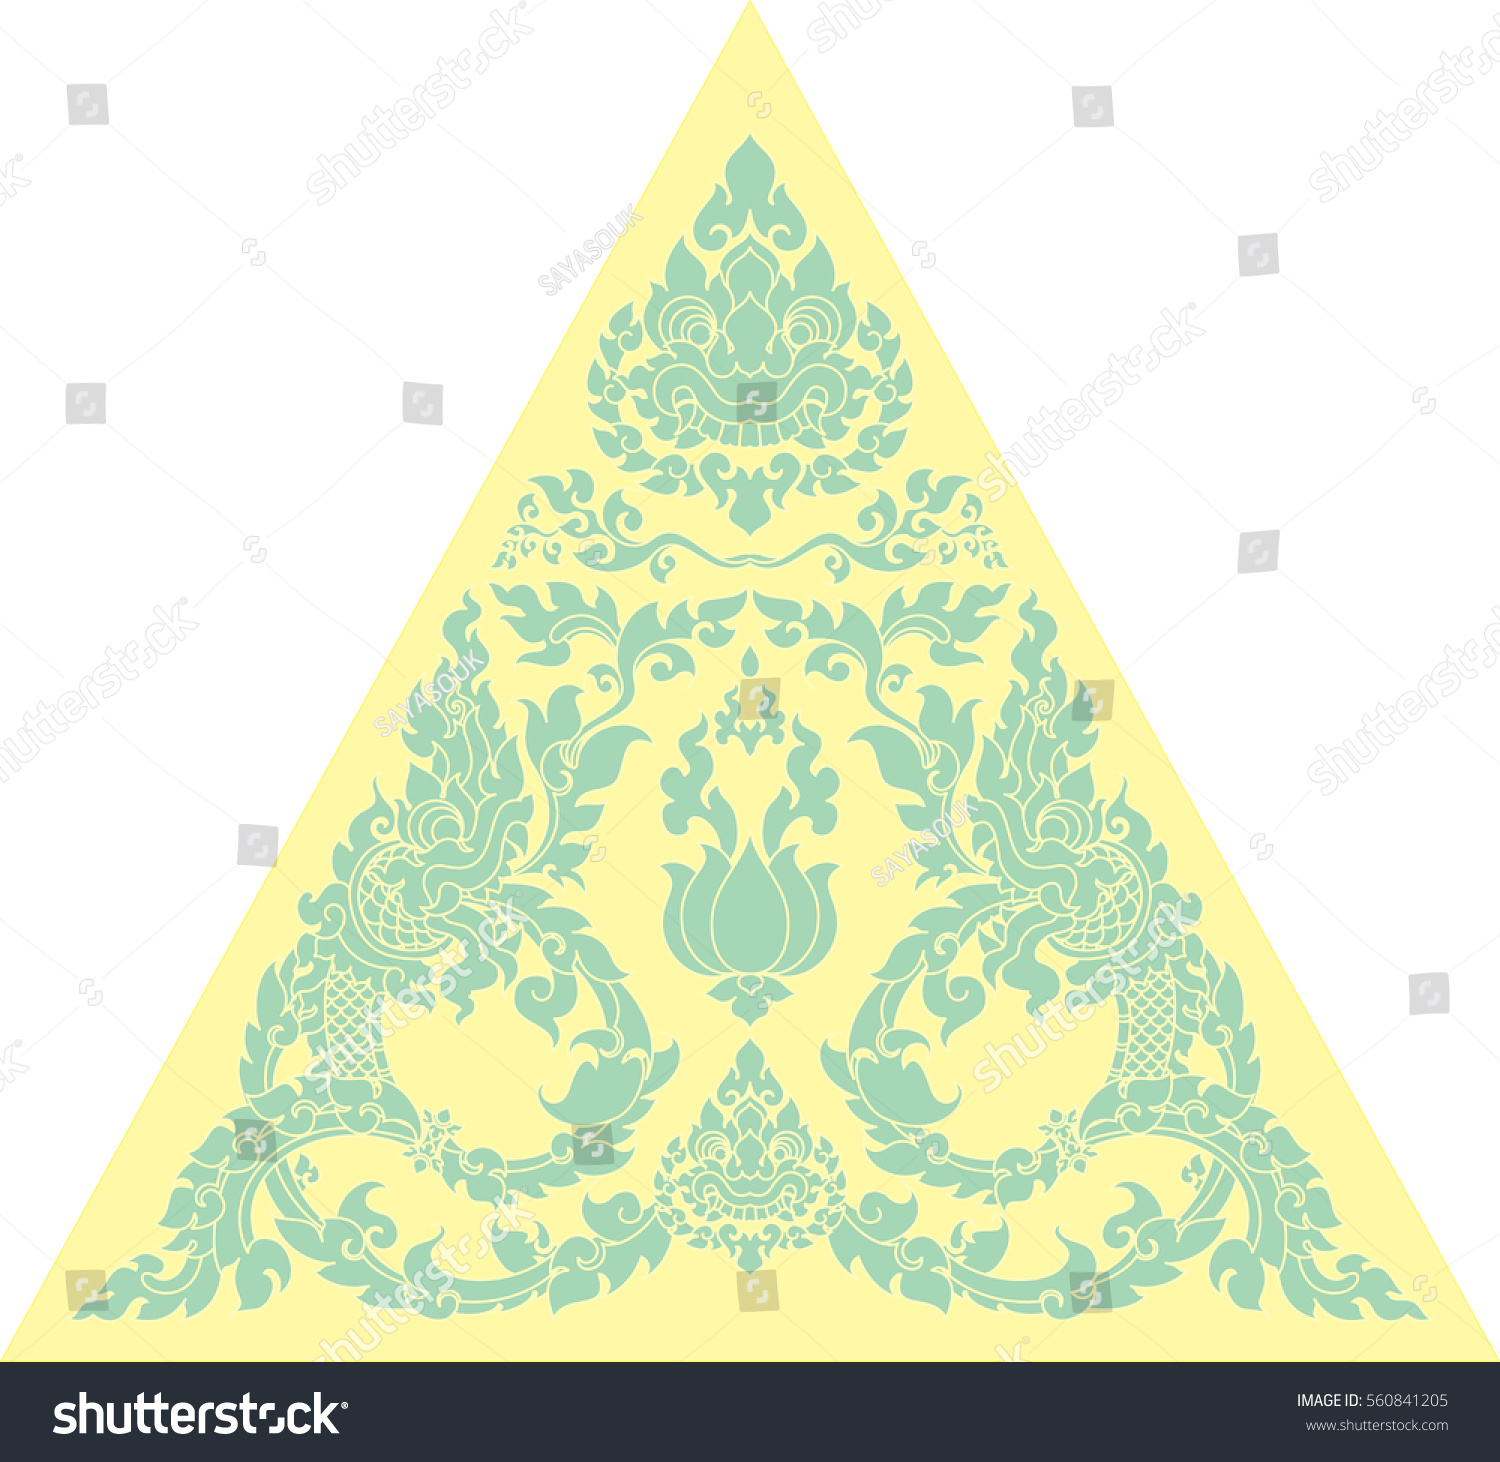 Floral Giant Faces Floral Twins Naga Stock Vector 560841205 ...